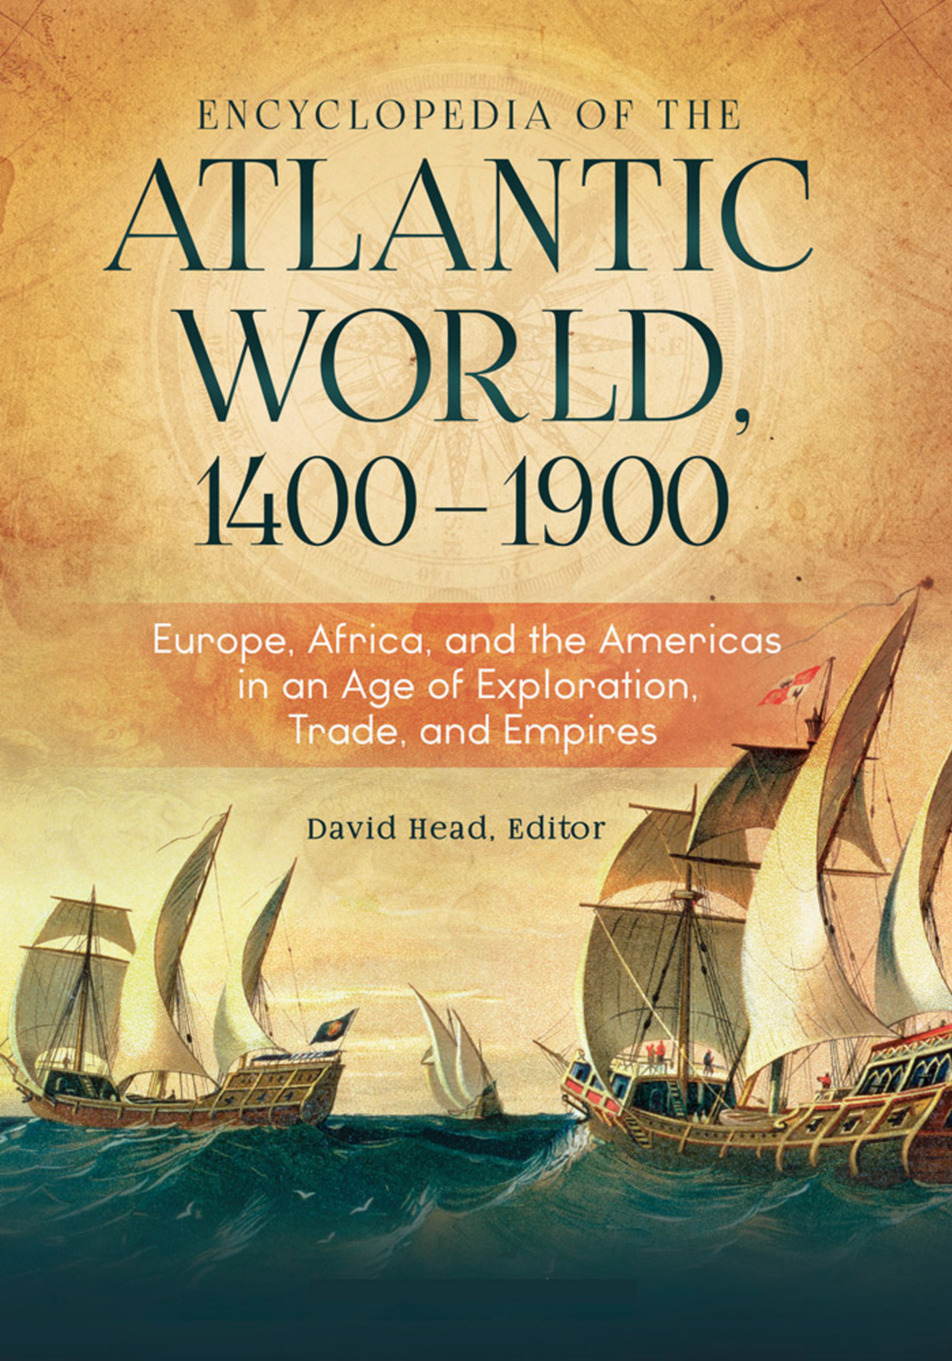 Encyclopedia of the Atlantic World, 1400–1900: Europe, Africa, and the Americas in An Age of Exploration, Trade, and Empires [2 volumes] page Cover1